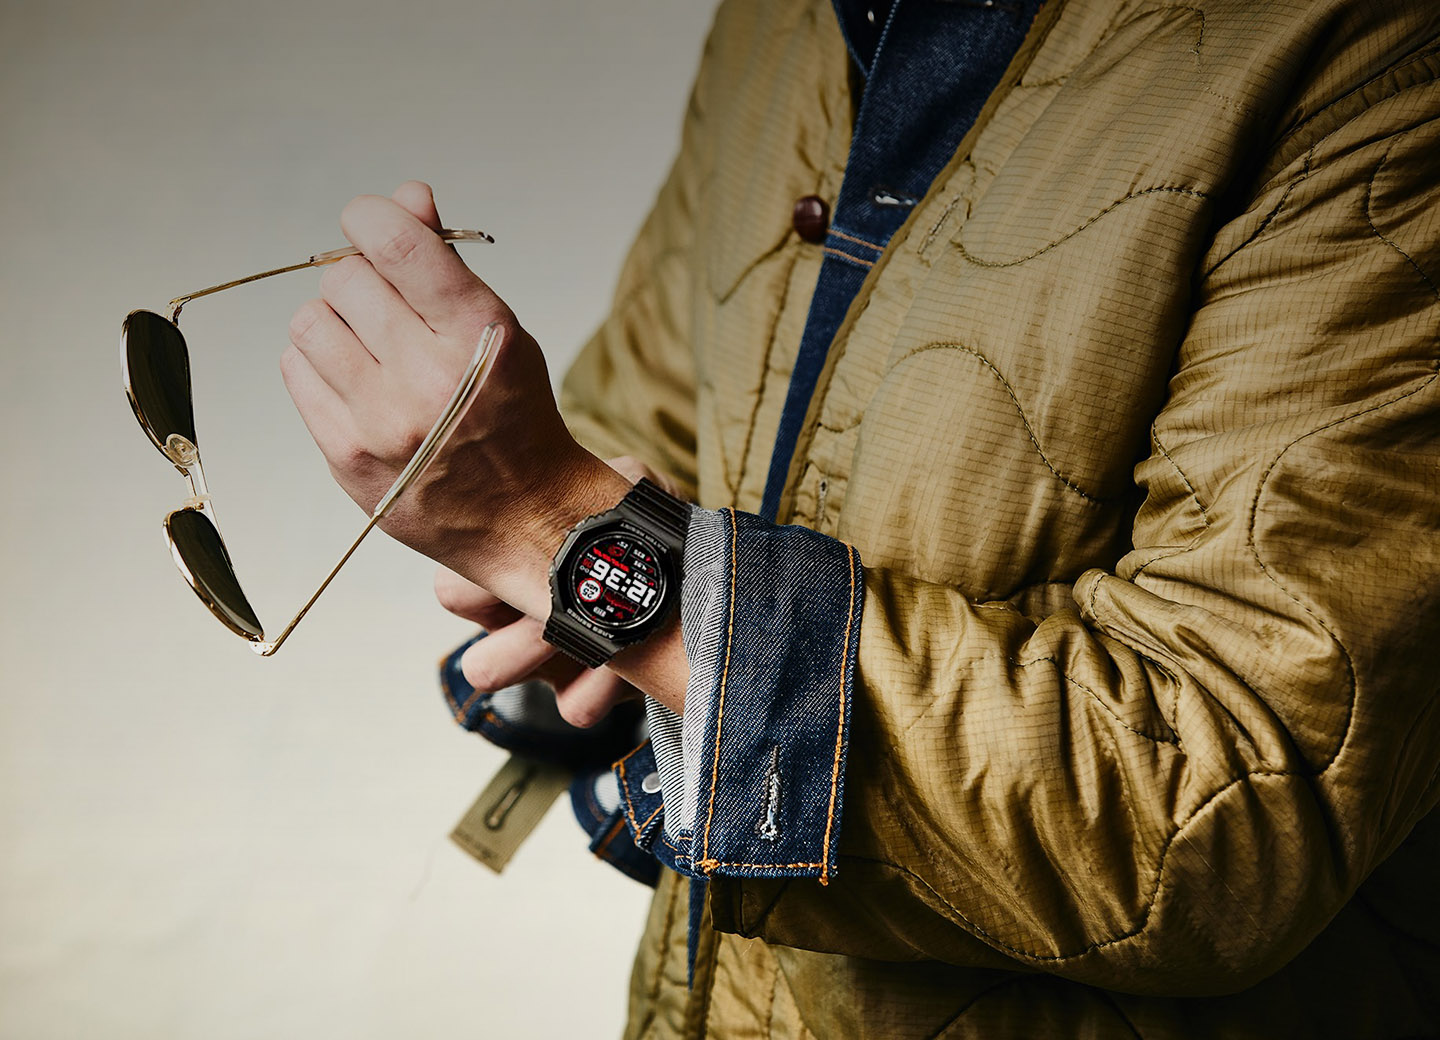 Smartwatch Zeblaze Ares 2 on the hand of a man in a yellow jacket